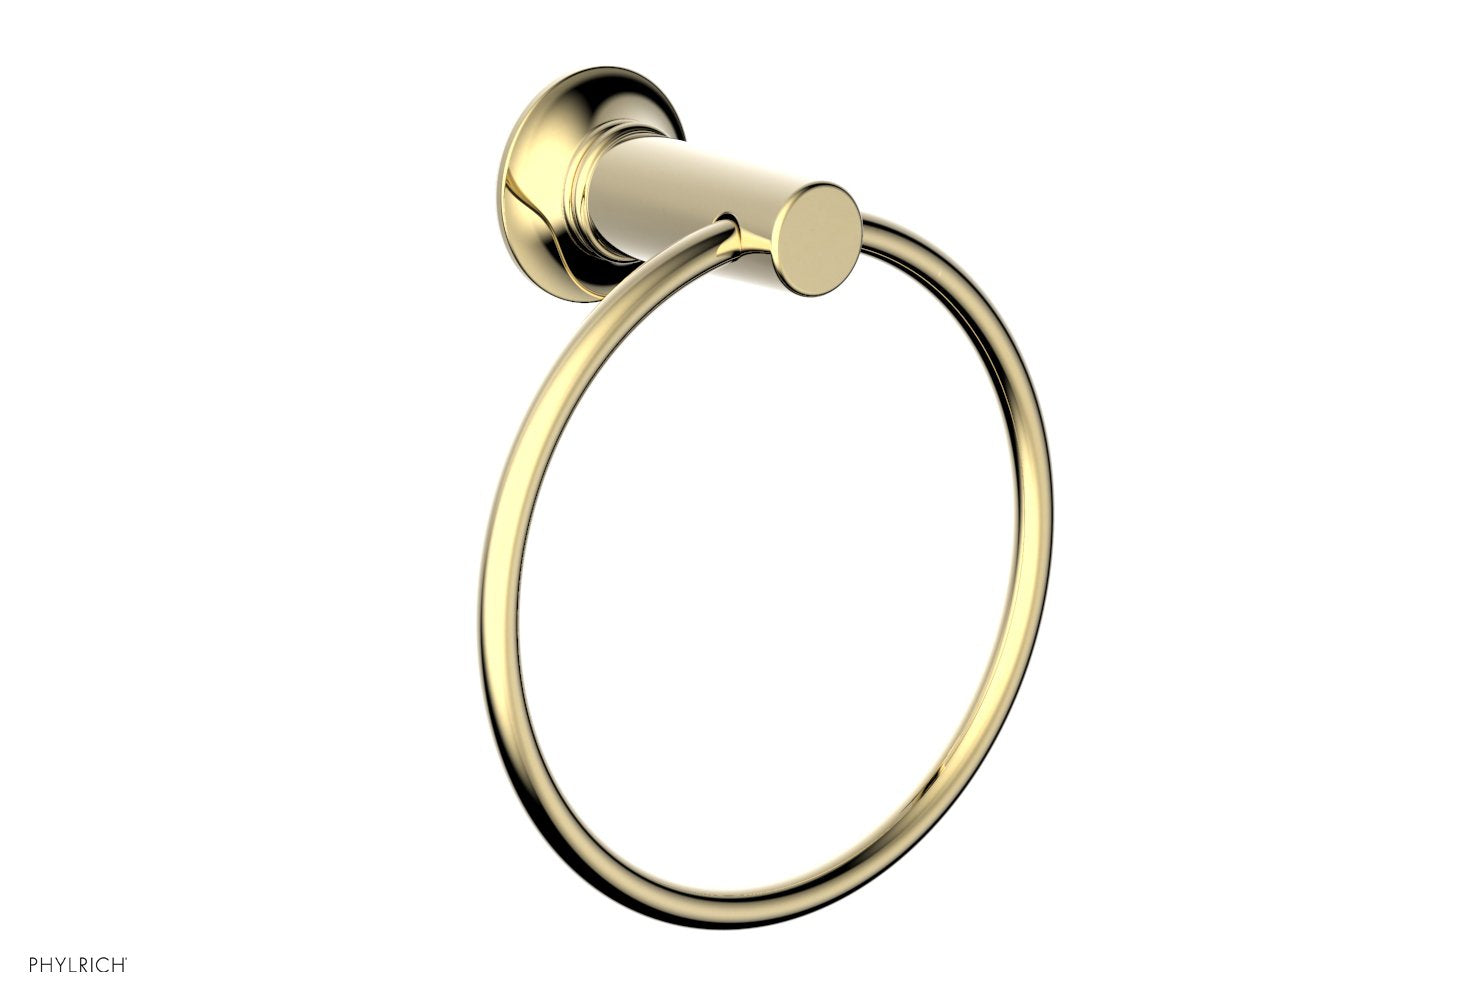 HEX MODERN Towel Ring 501-75 - Phylrich